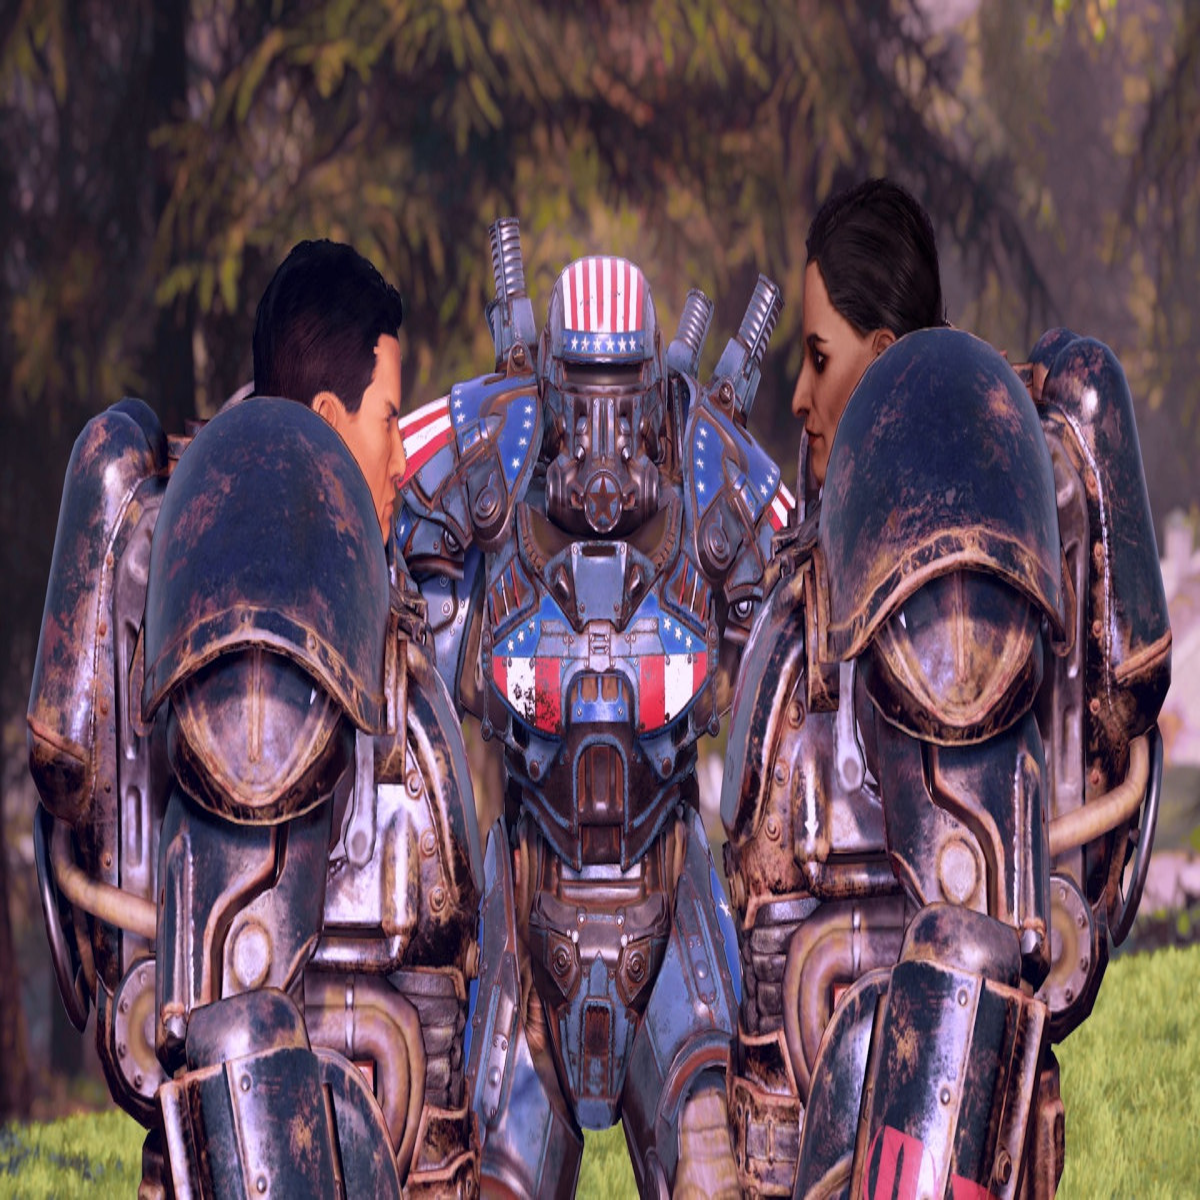 Fallout 76 Expeditions could send players back to Fallout 3's Washington  D.C.